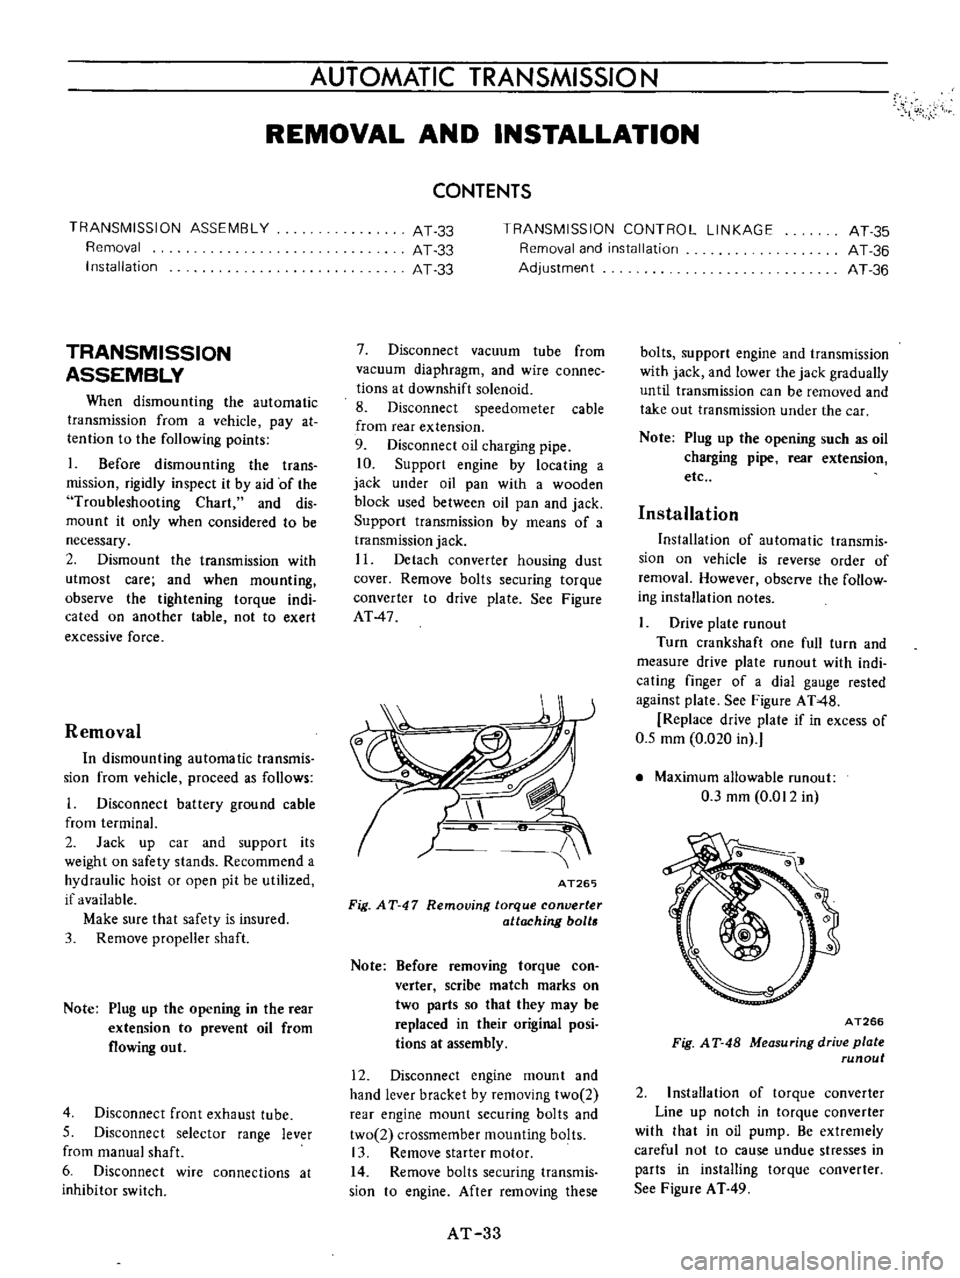 DATSUN B110 1973  Service Repair Manual 
AUTOMATIC 
TRANSMISSION

REMOVAL 
AND 
INSTAllATION

TRANSMISSION 
ASSEMBLY

Removal

Installation

TRANSMISSION

ASSEMBLY

When

dismounting 
the 
automatic

transmission 
from 
a

vehicle

pay 
at
